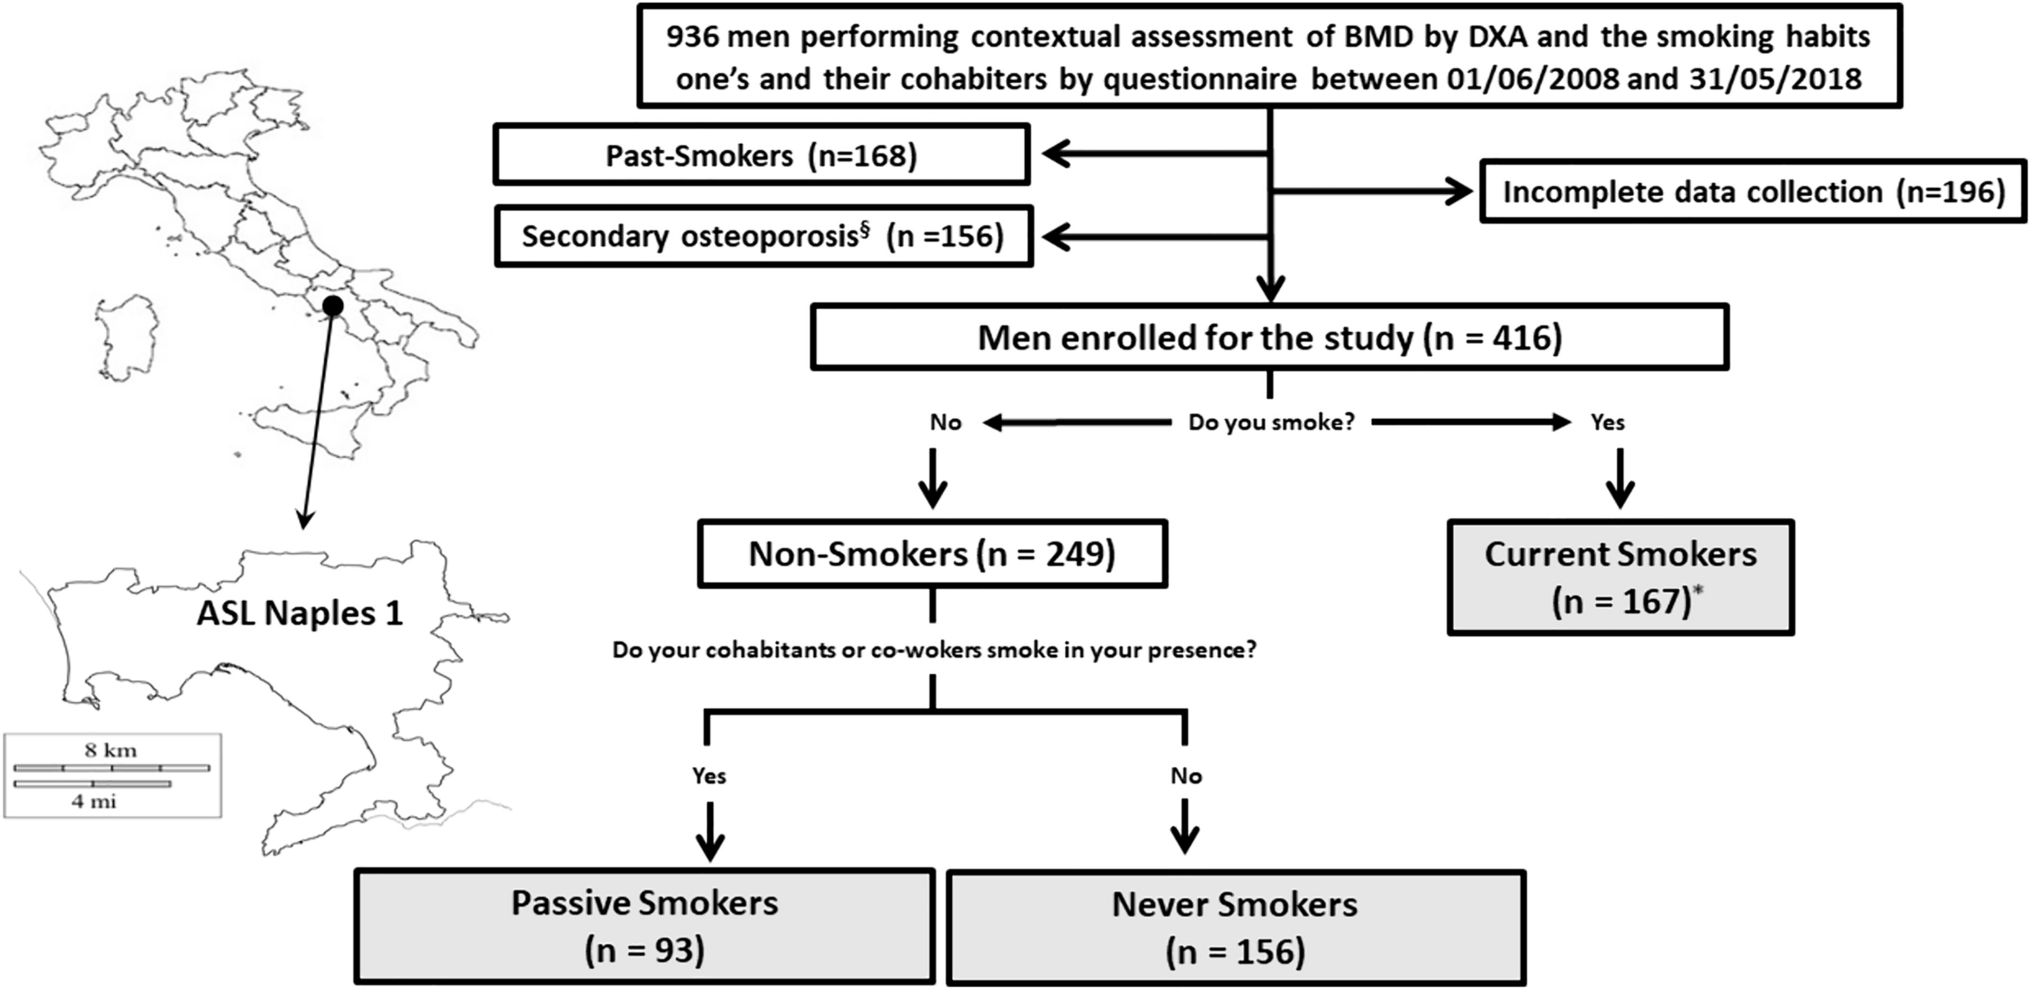 Smoking habits and osteoporosis in community-dwelling men subjected to dual-X-ray absorptiometry: a cross-sectional study